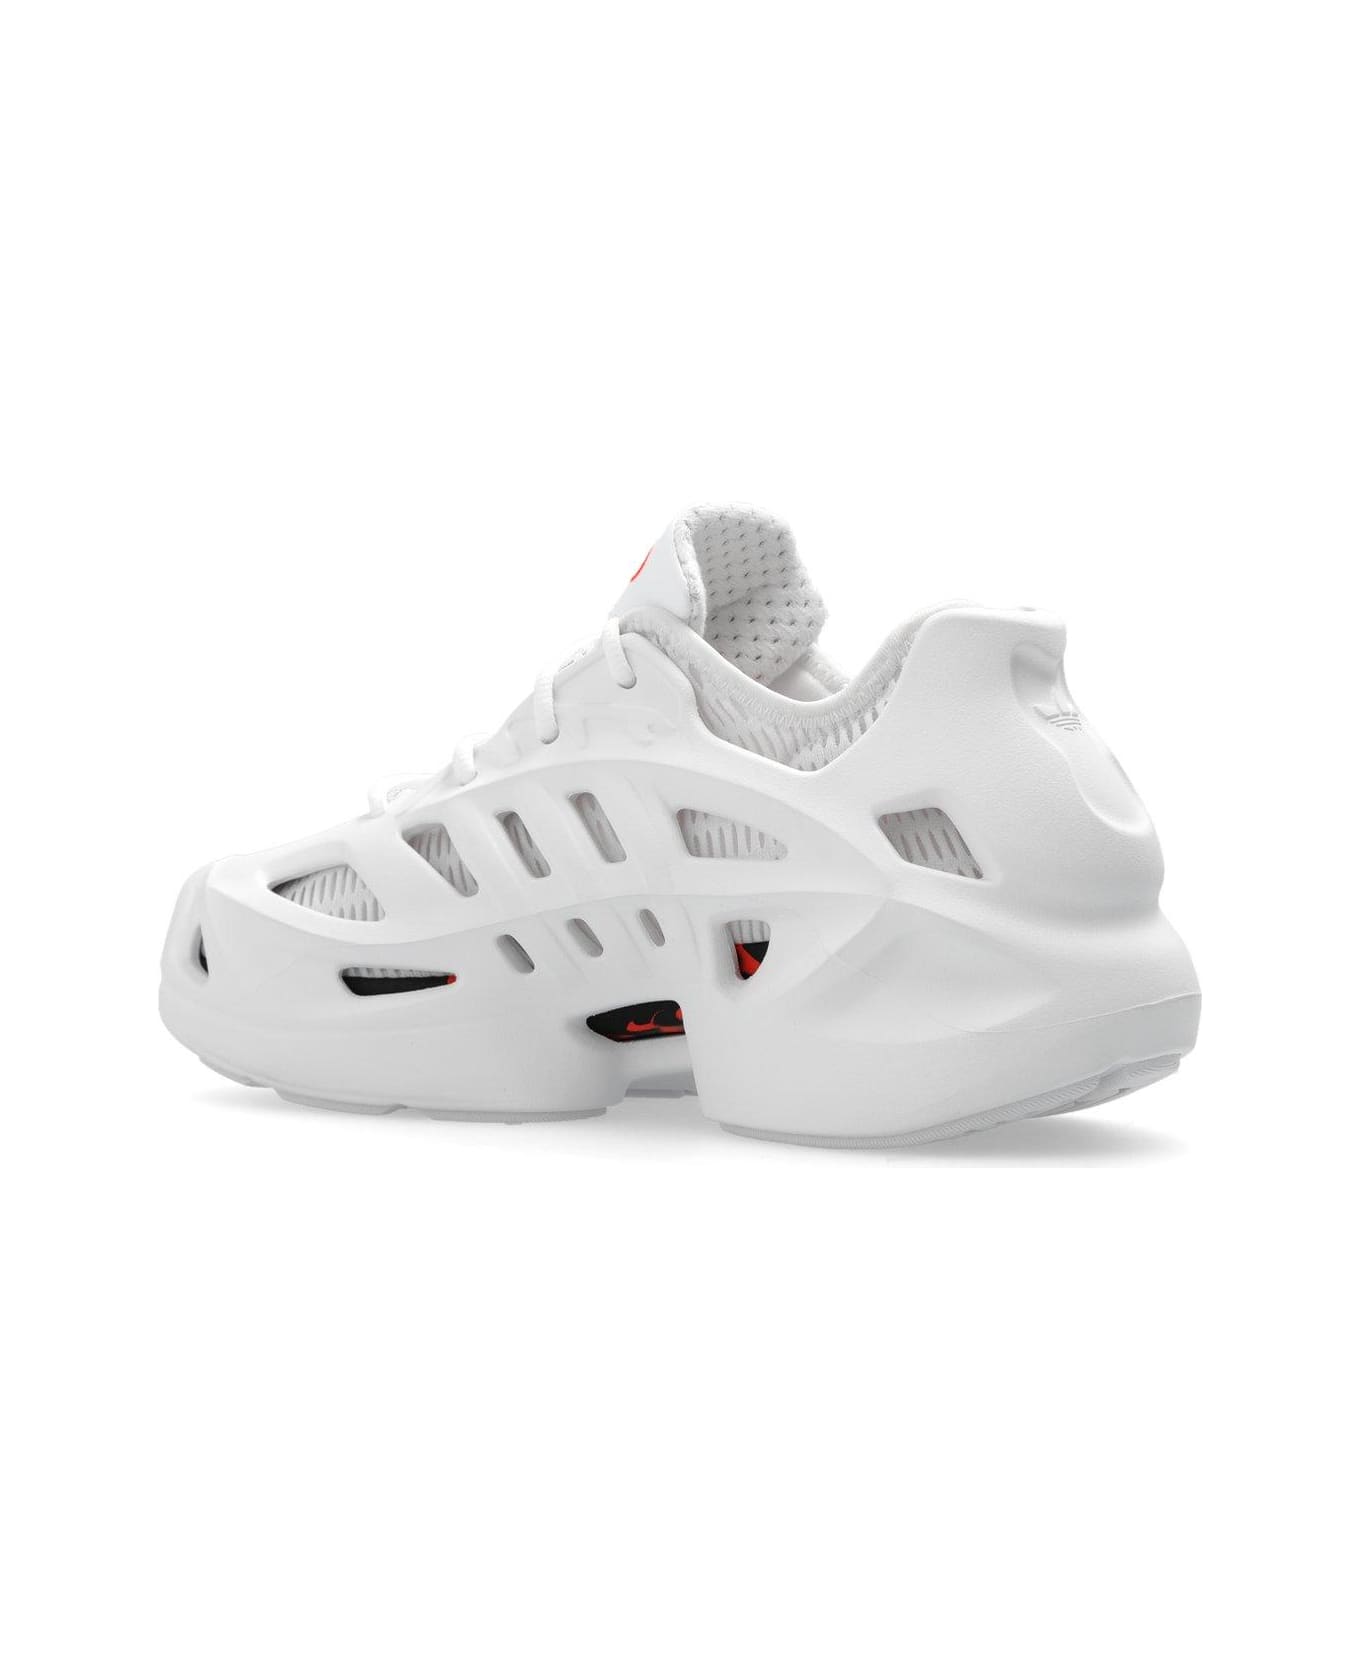 Adidas Originals Adifom Climacool Cut-out Lace-up Sneakers - White